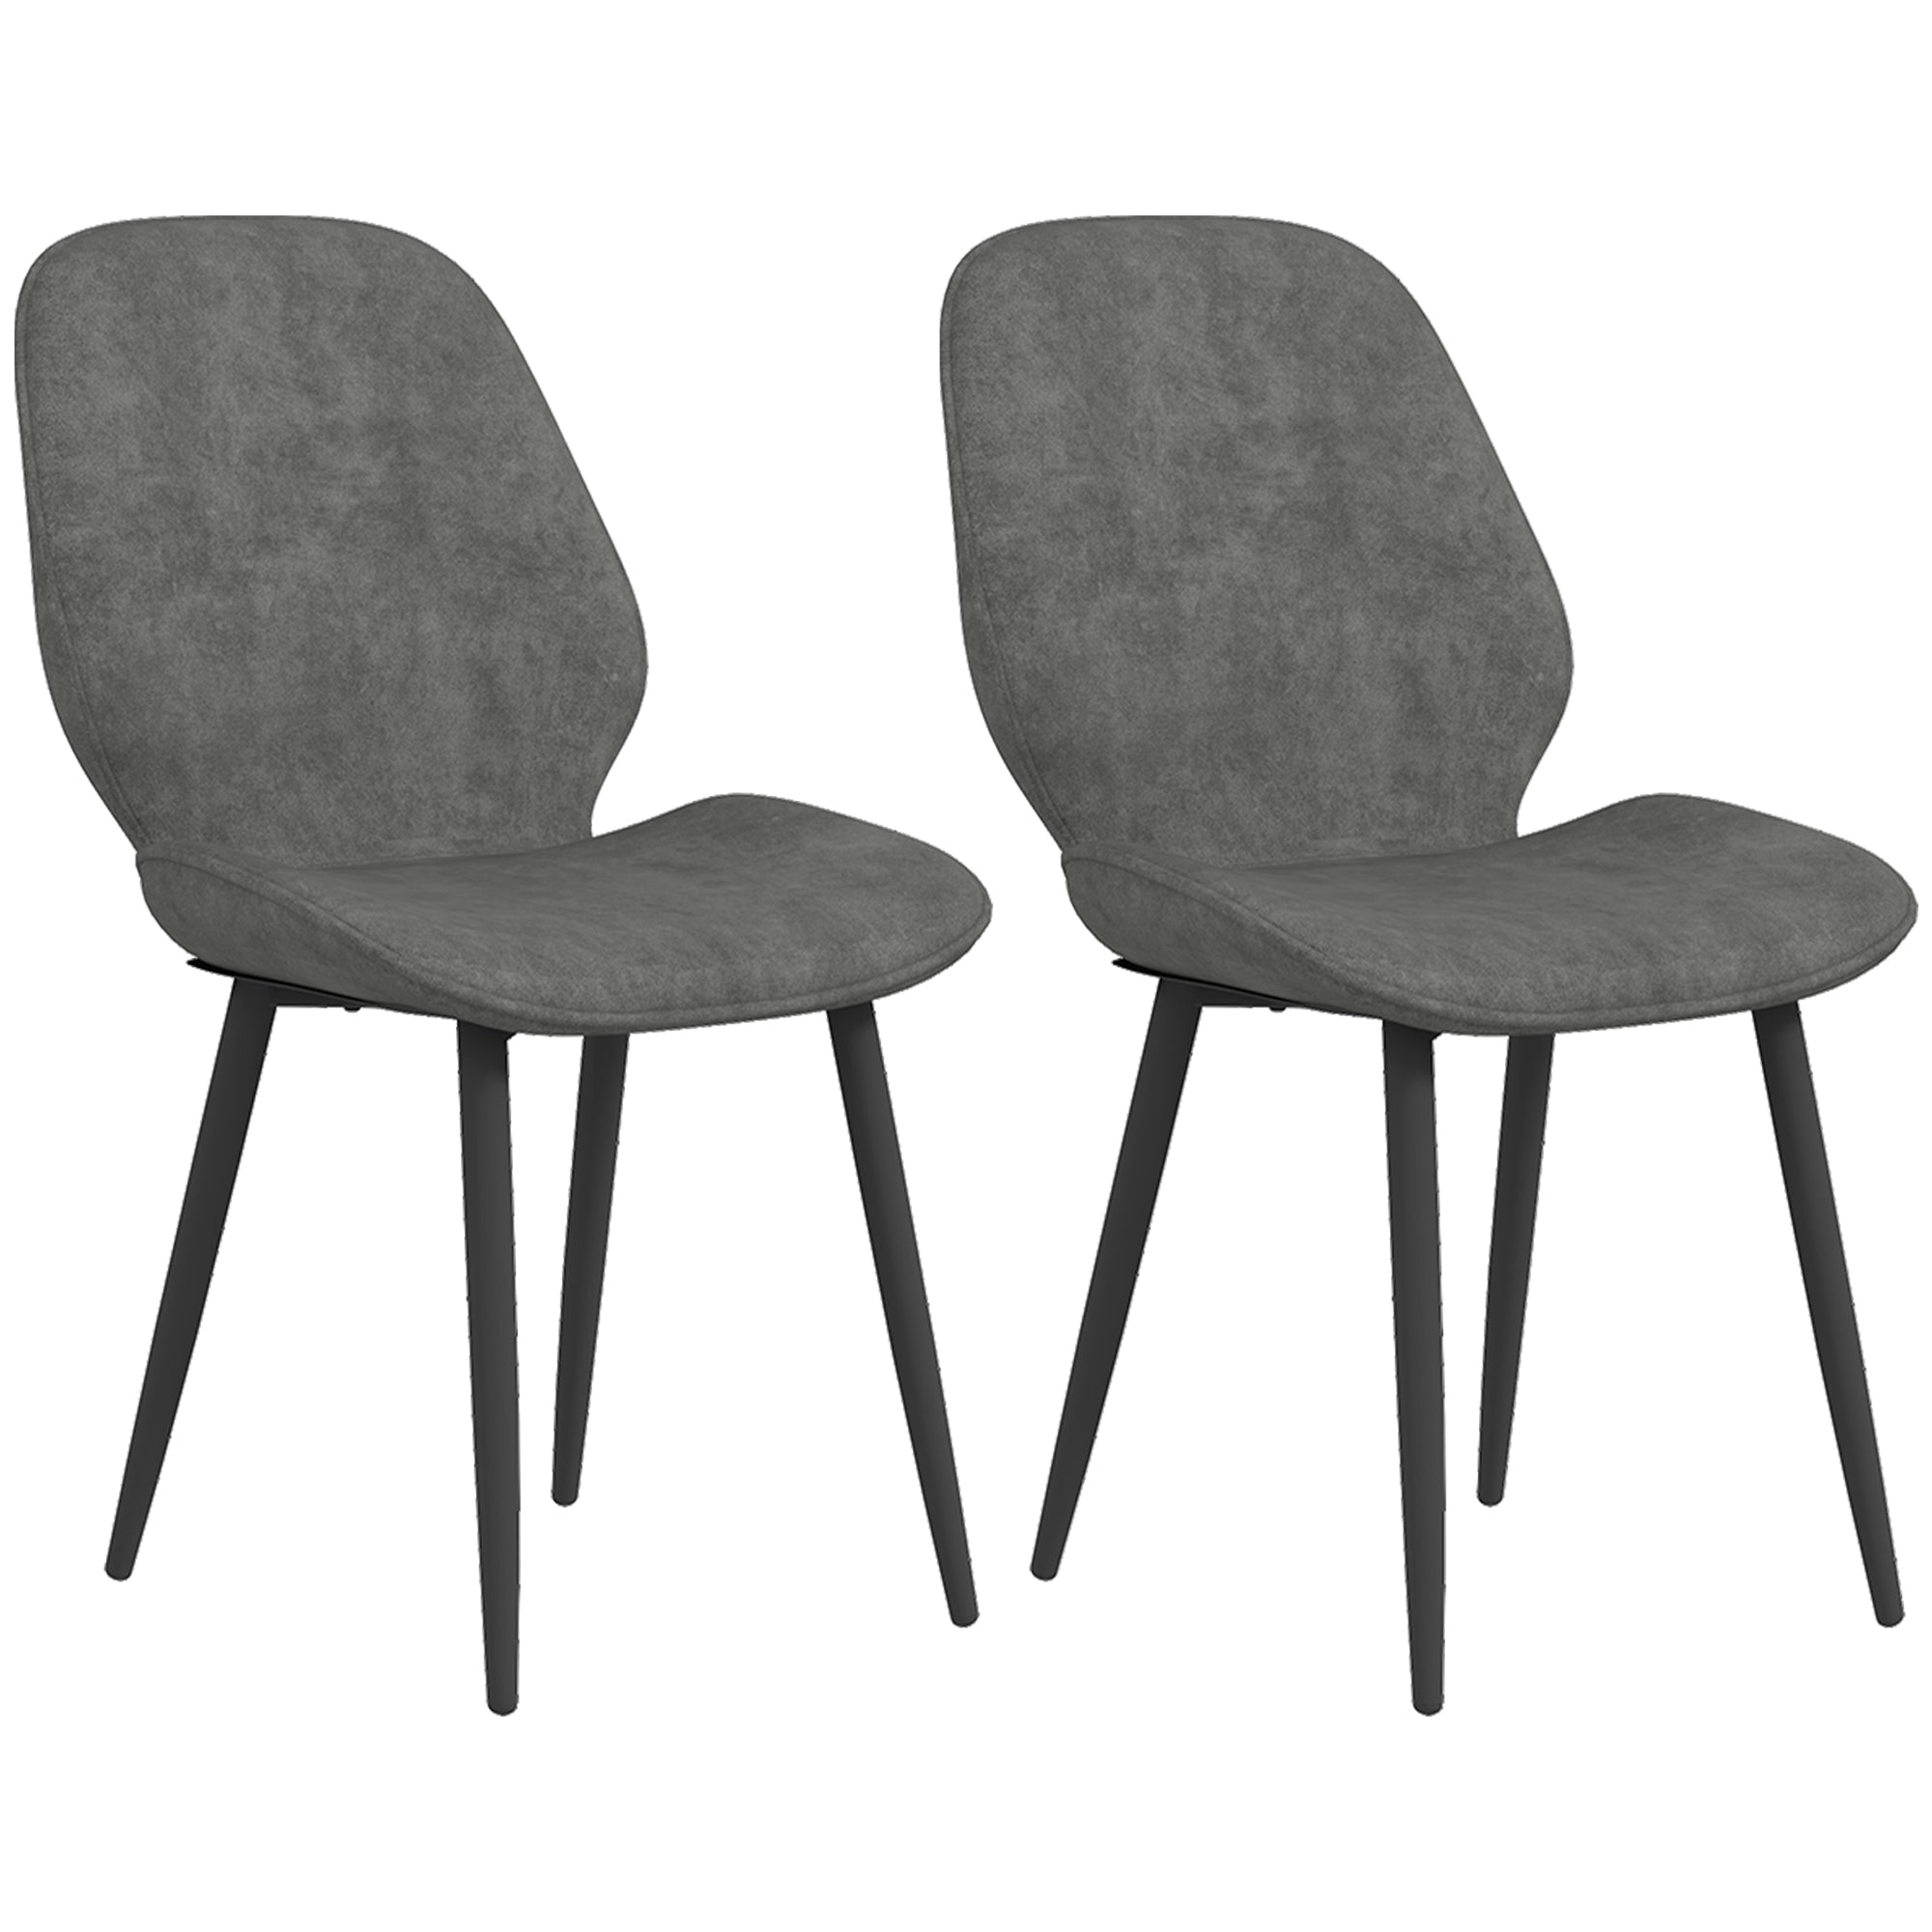 Velvet Dining Chairs, Set of 2 Dining Room Chairs with Metal Legs for Living Room, Dining Room, Grey-0